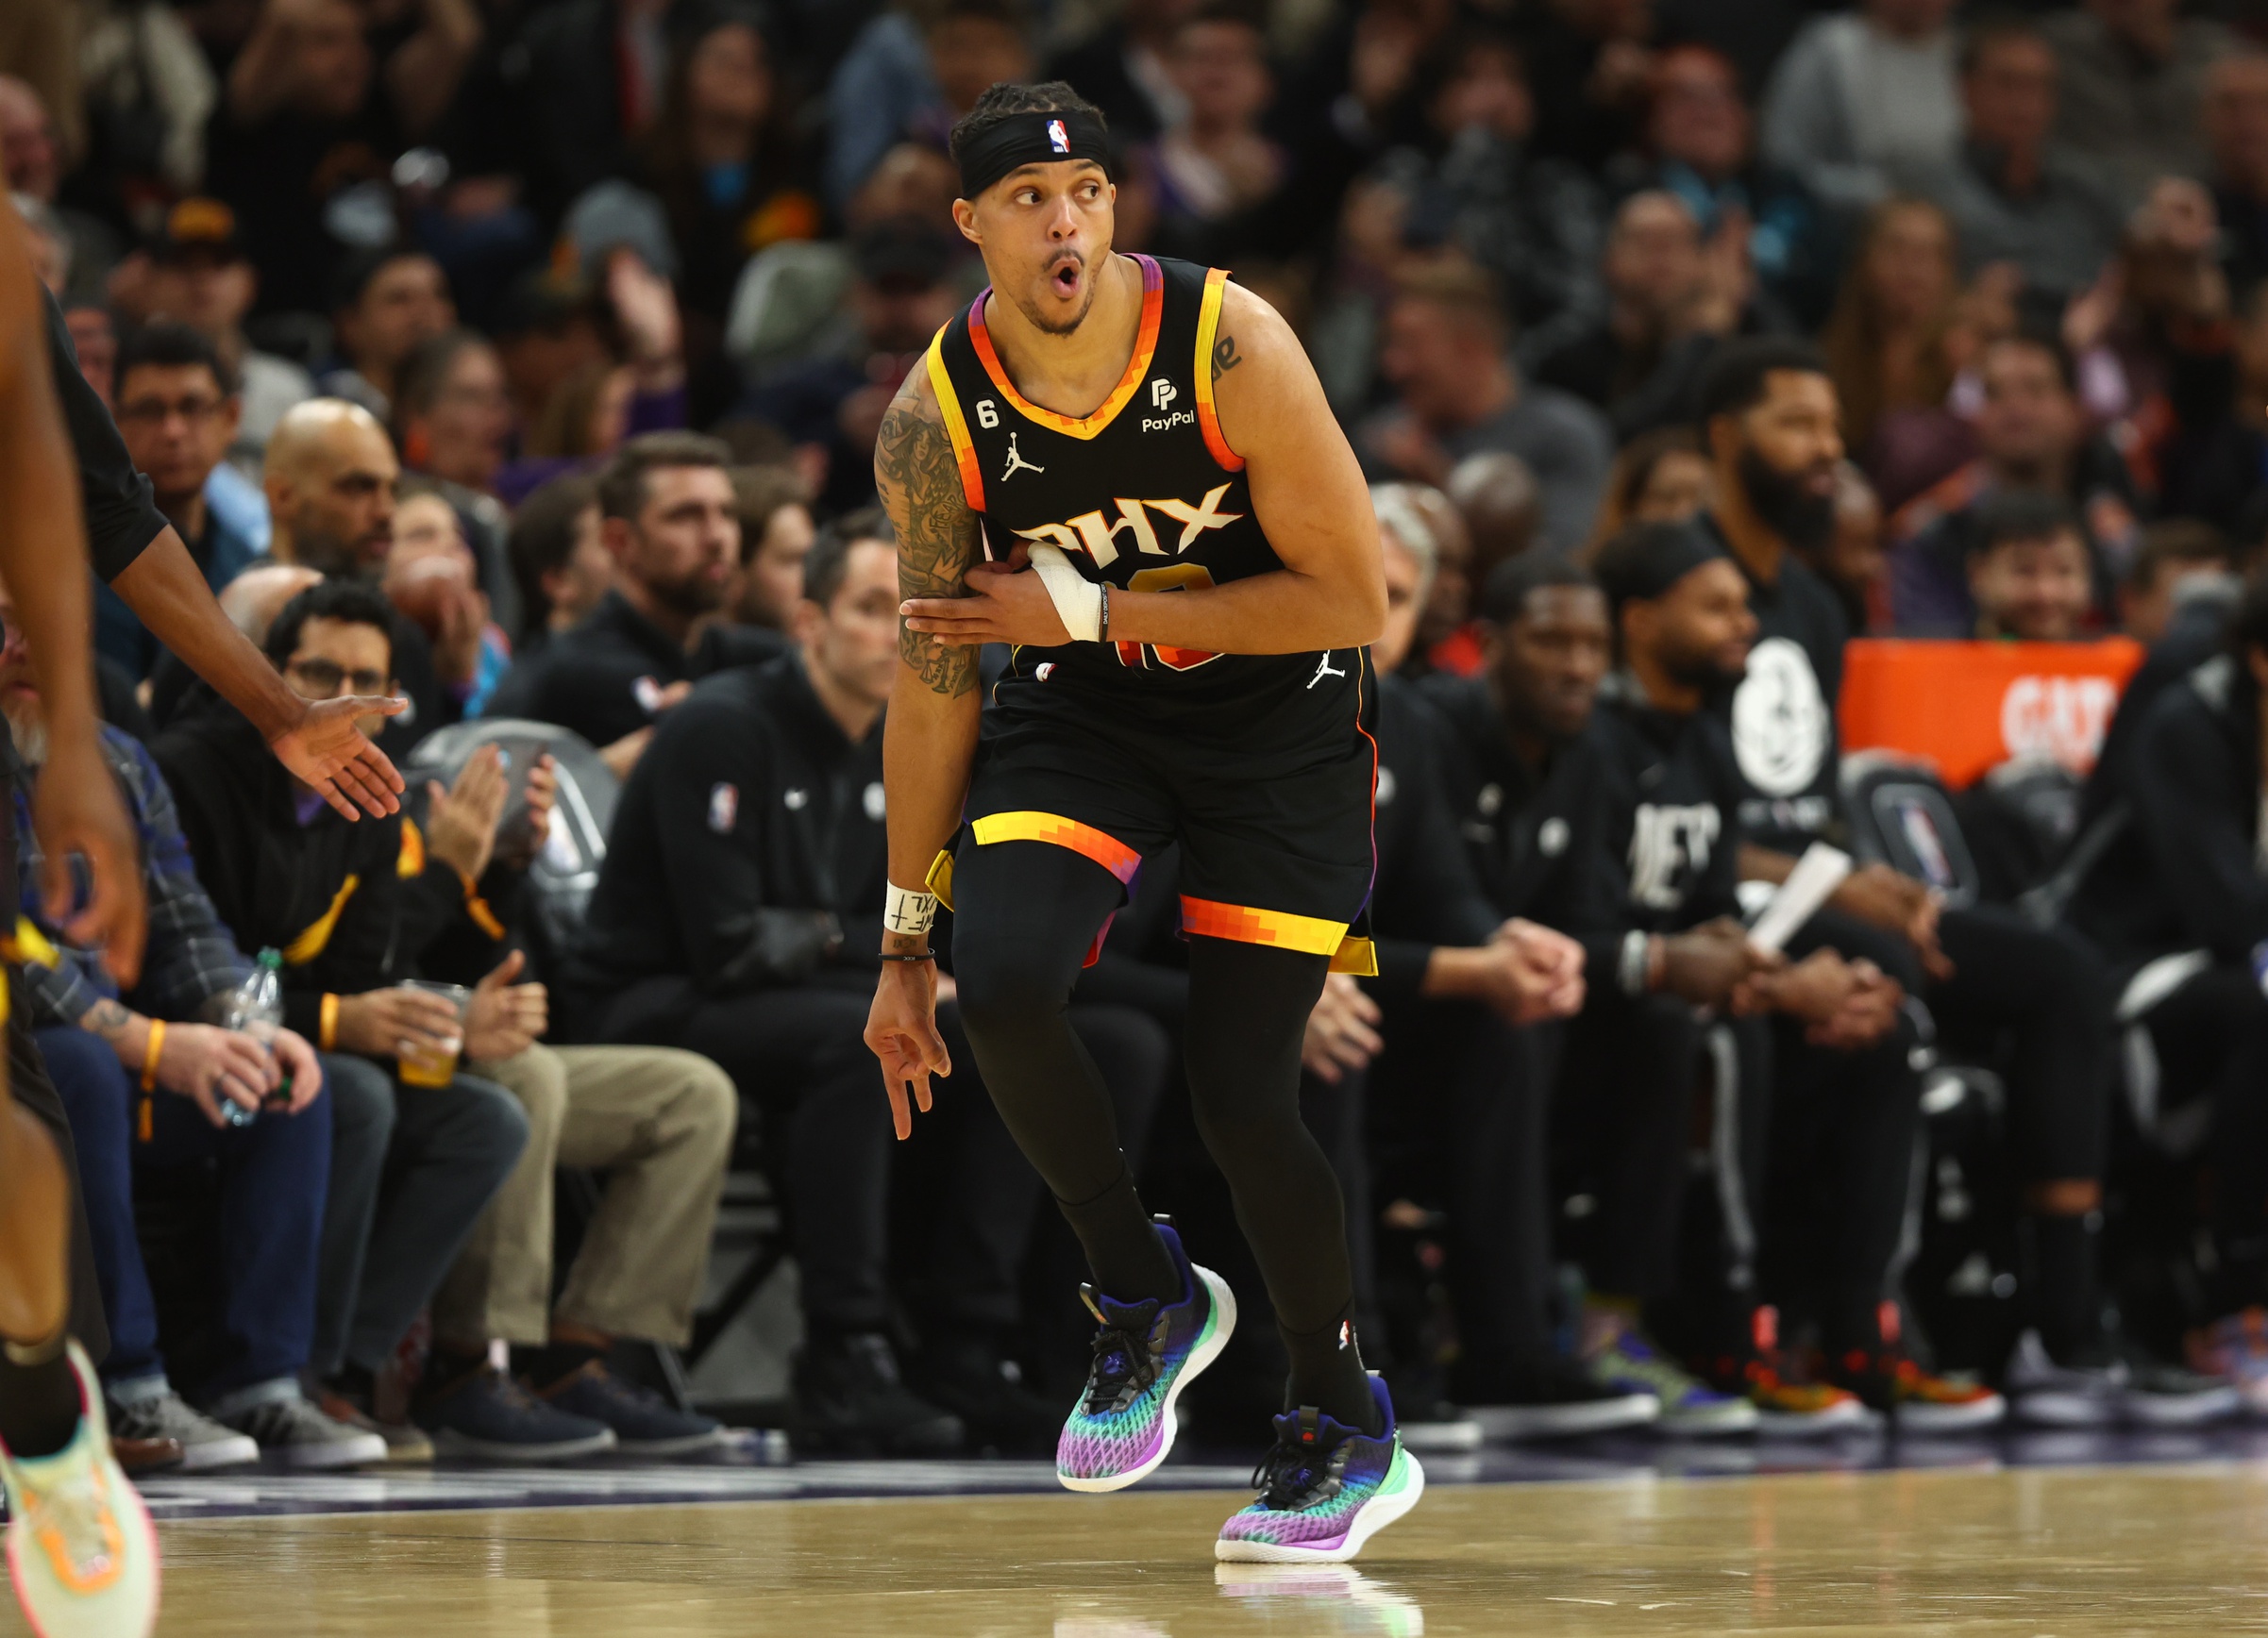 BREAKING: Damion Lee back with Suns - Burn City Sports